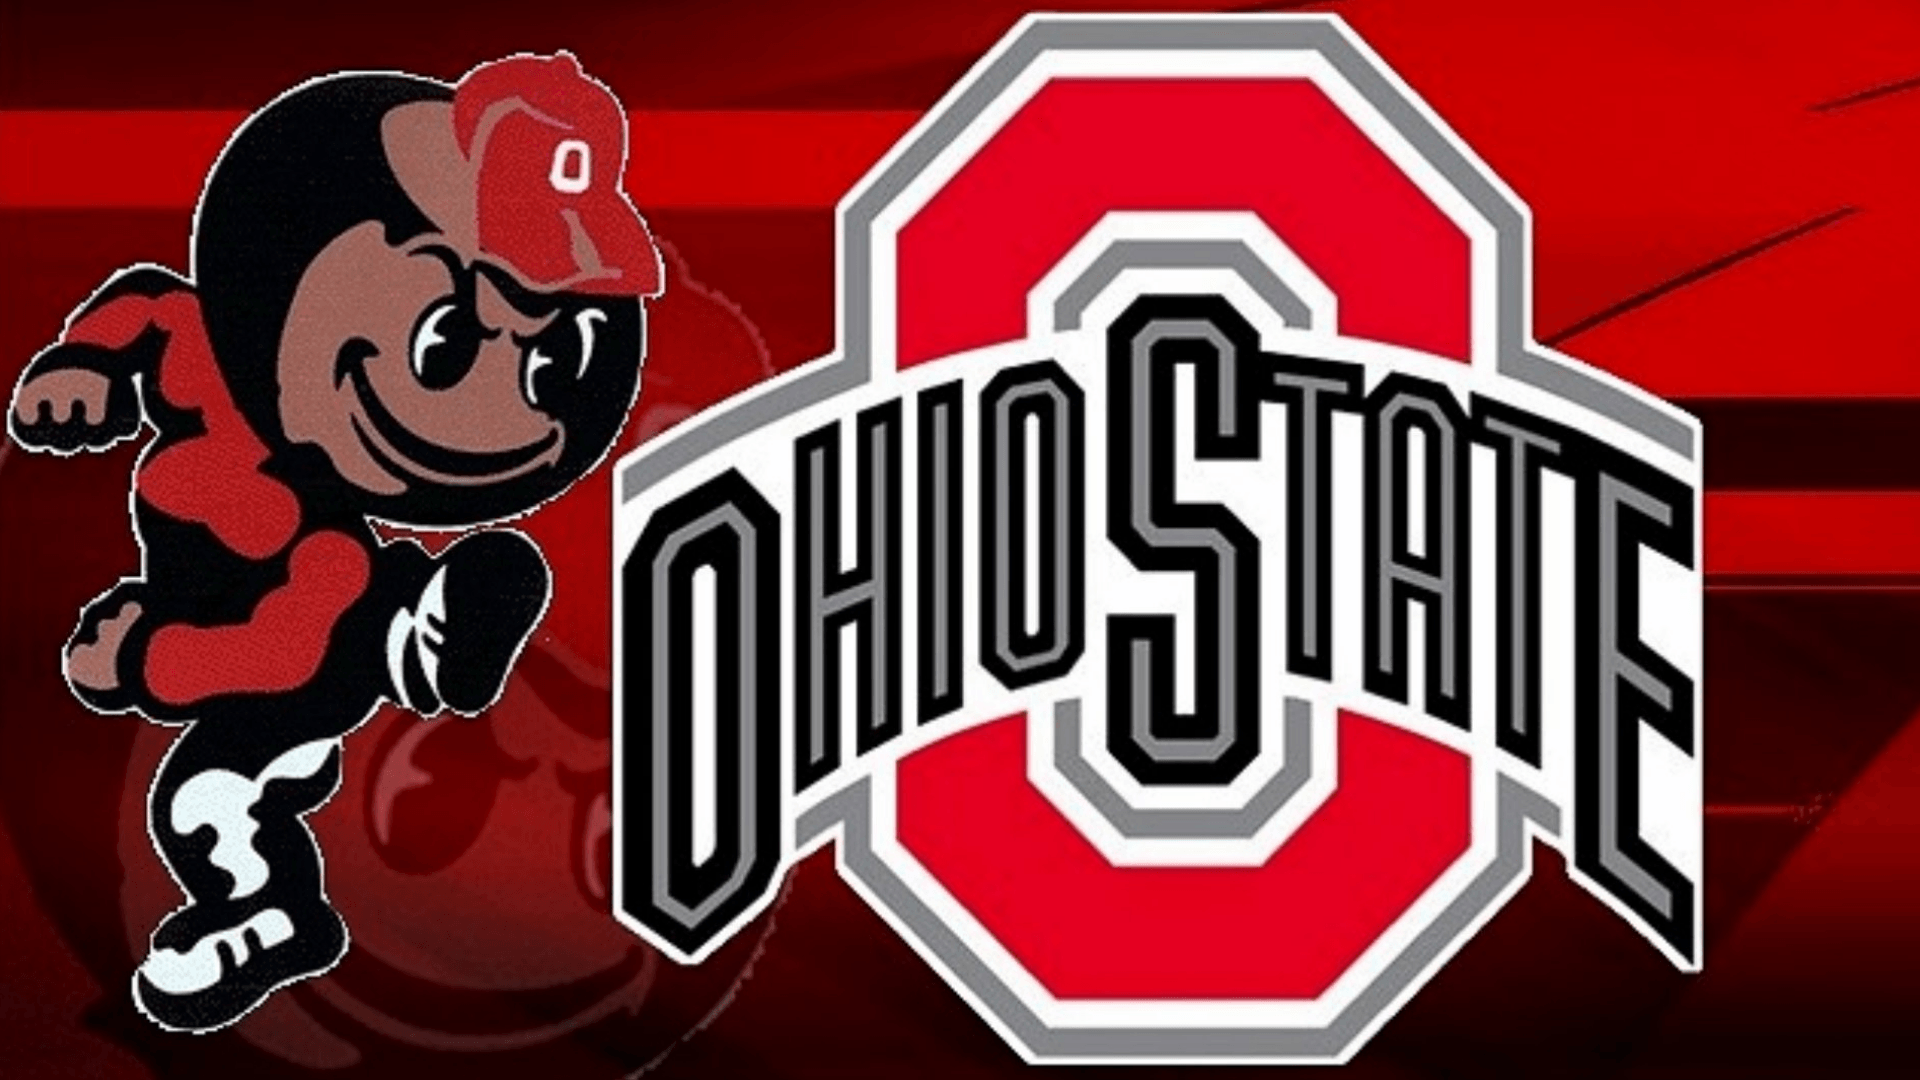 Ohio State Buckeyes Football Background Download